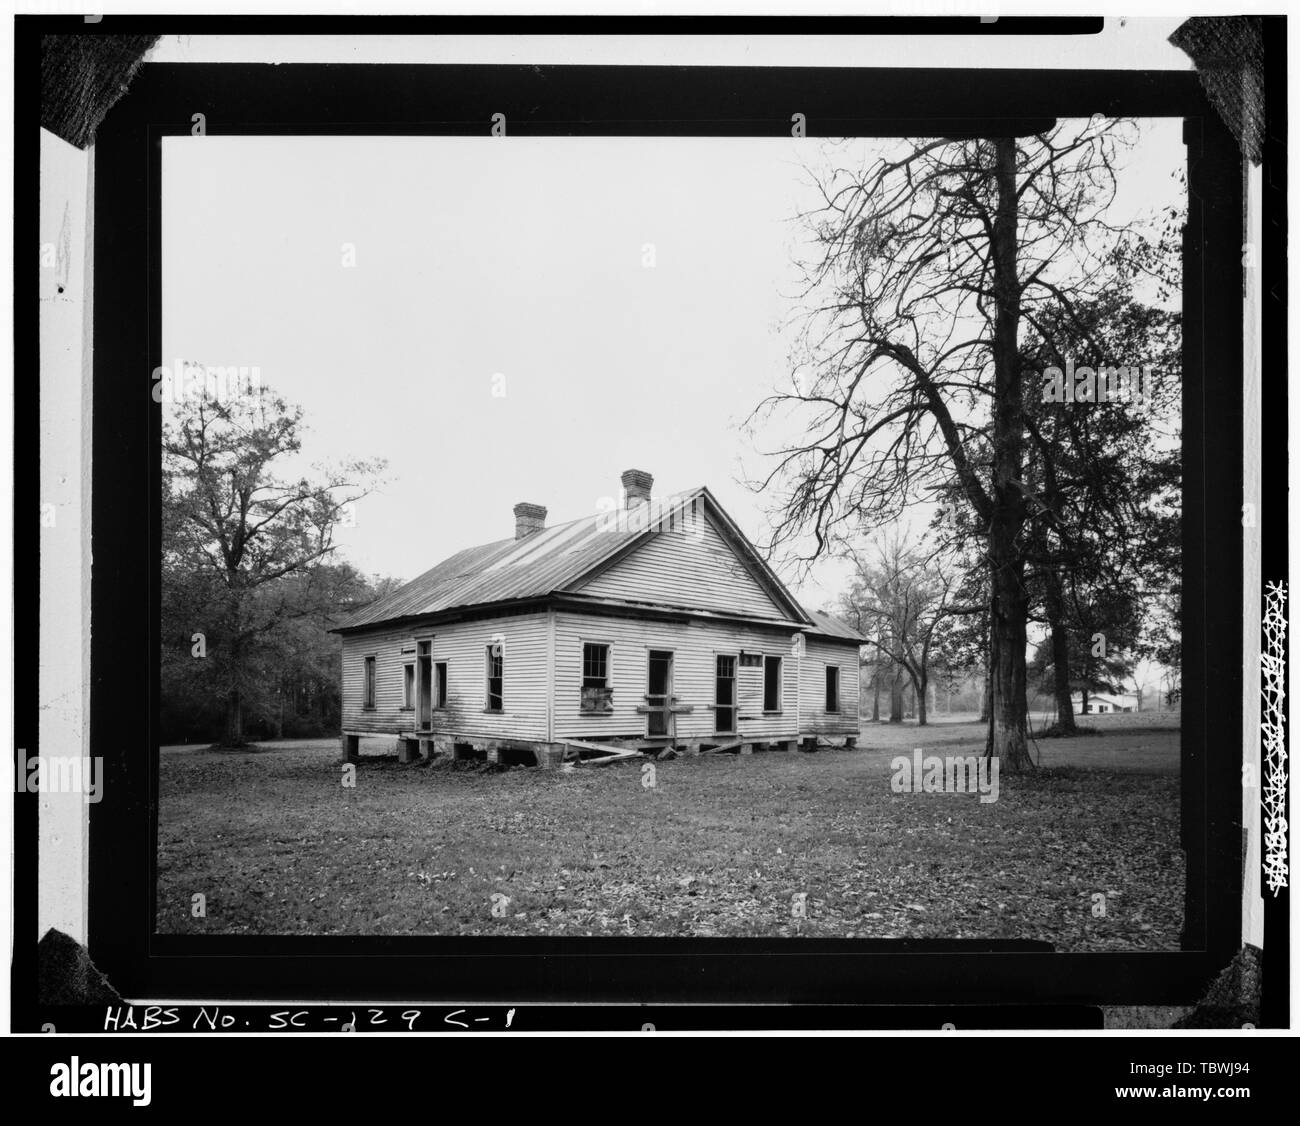 MATTHEW SINGLETON RESIDENCE, LOOKING SOUTHEAST  Kensington Plantation, Matthew Singleton Residence, U.S. Route 601, Eastover, Richland County, SC Stock Photo